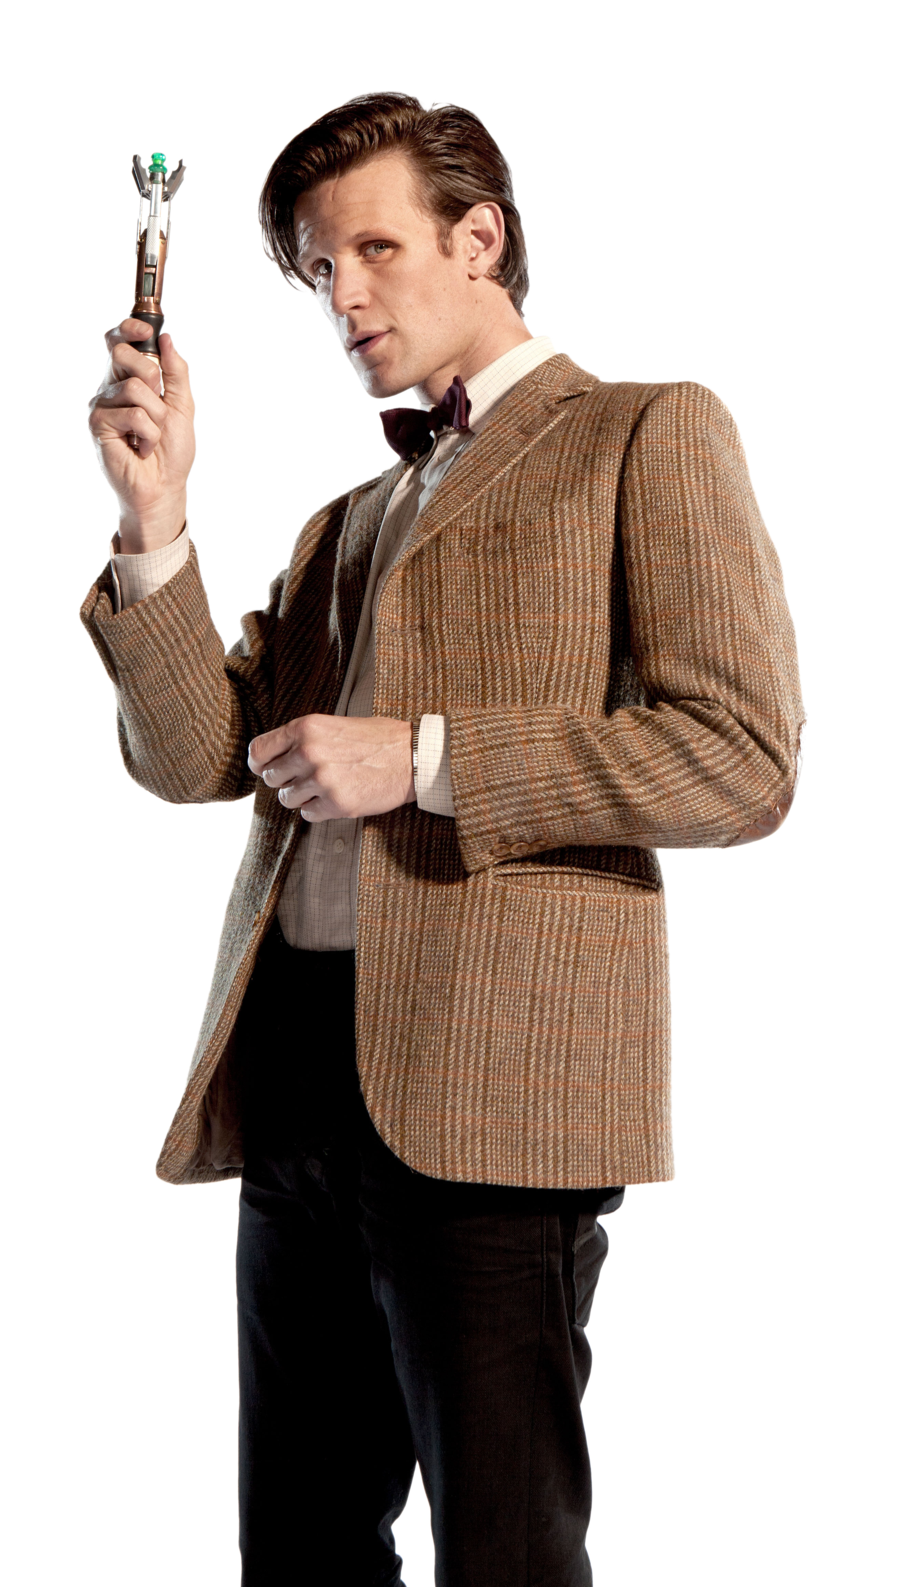 The Doctor Transparent Image PNG Image